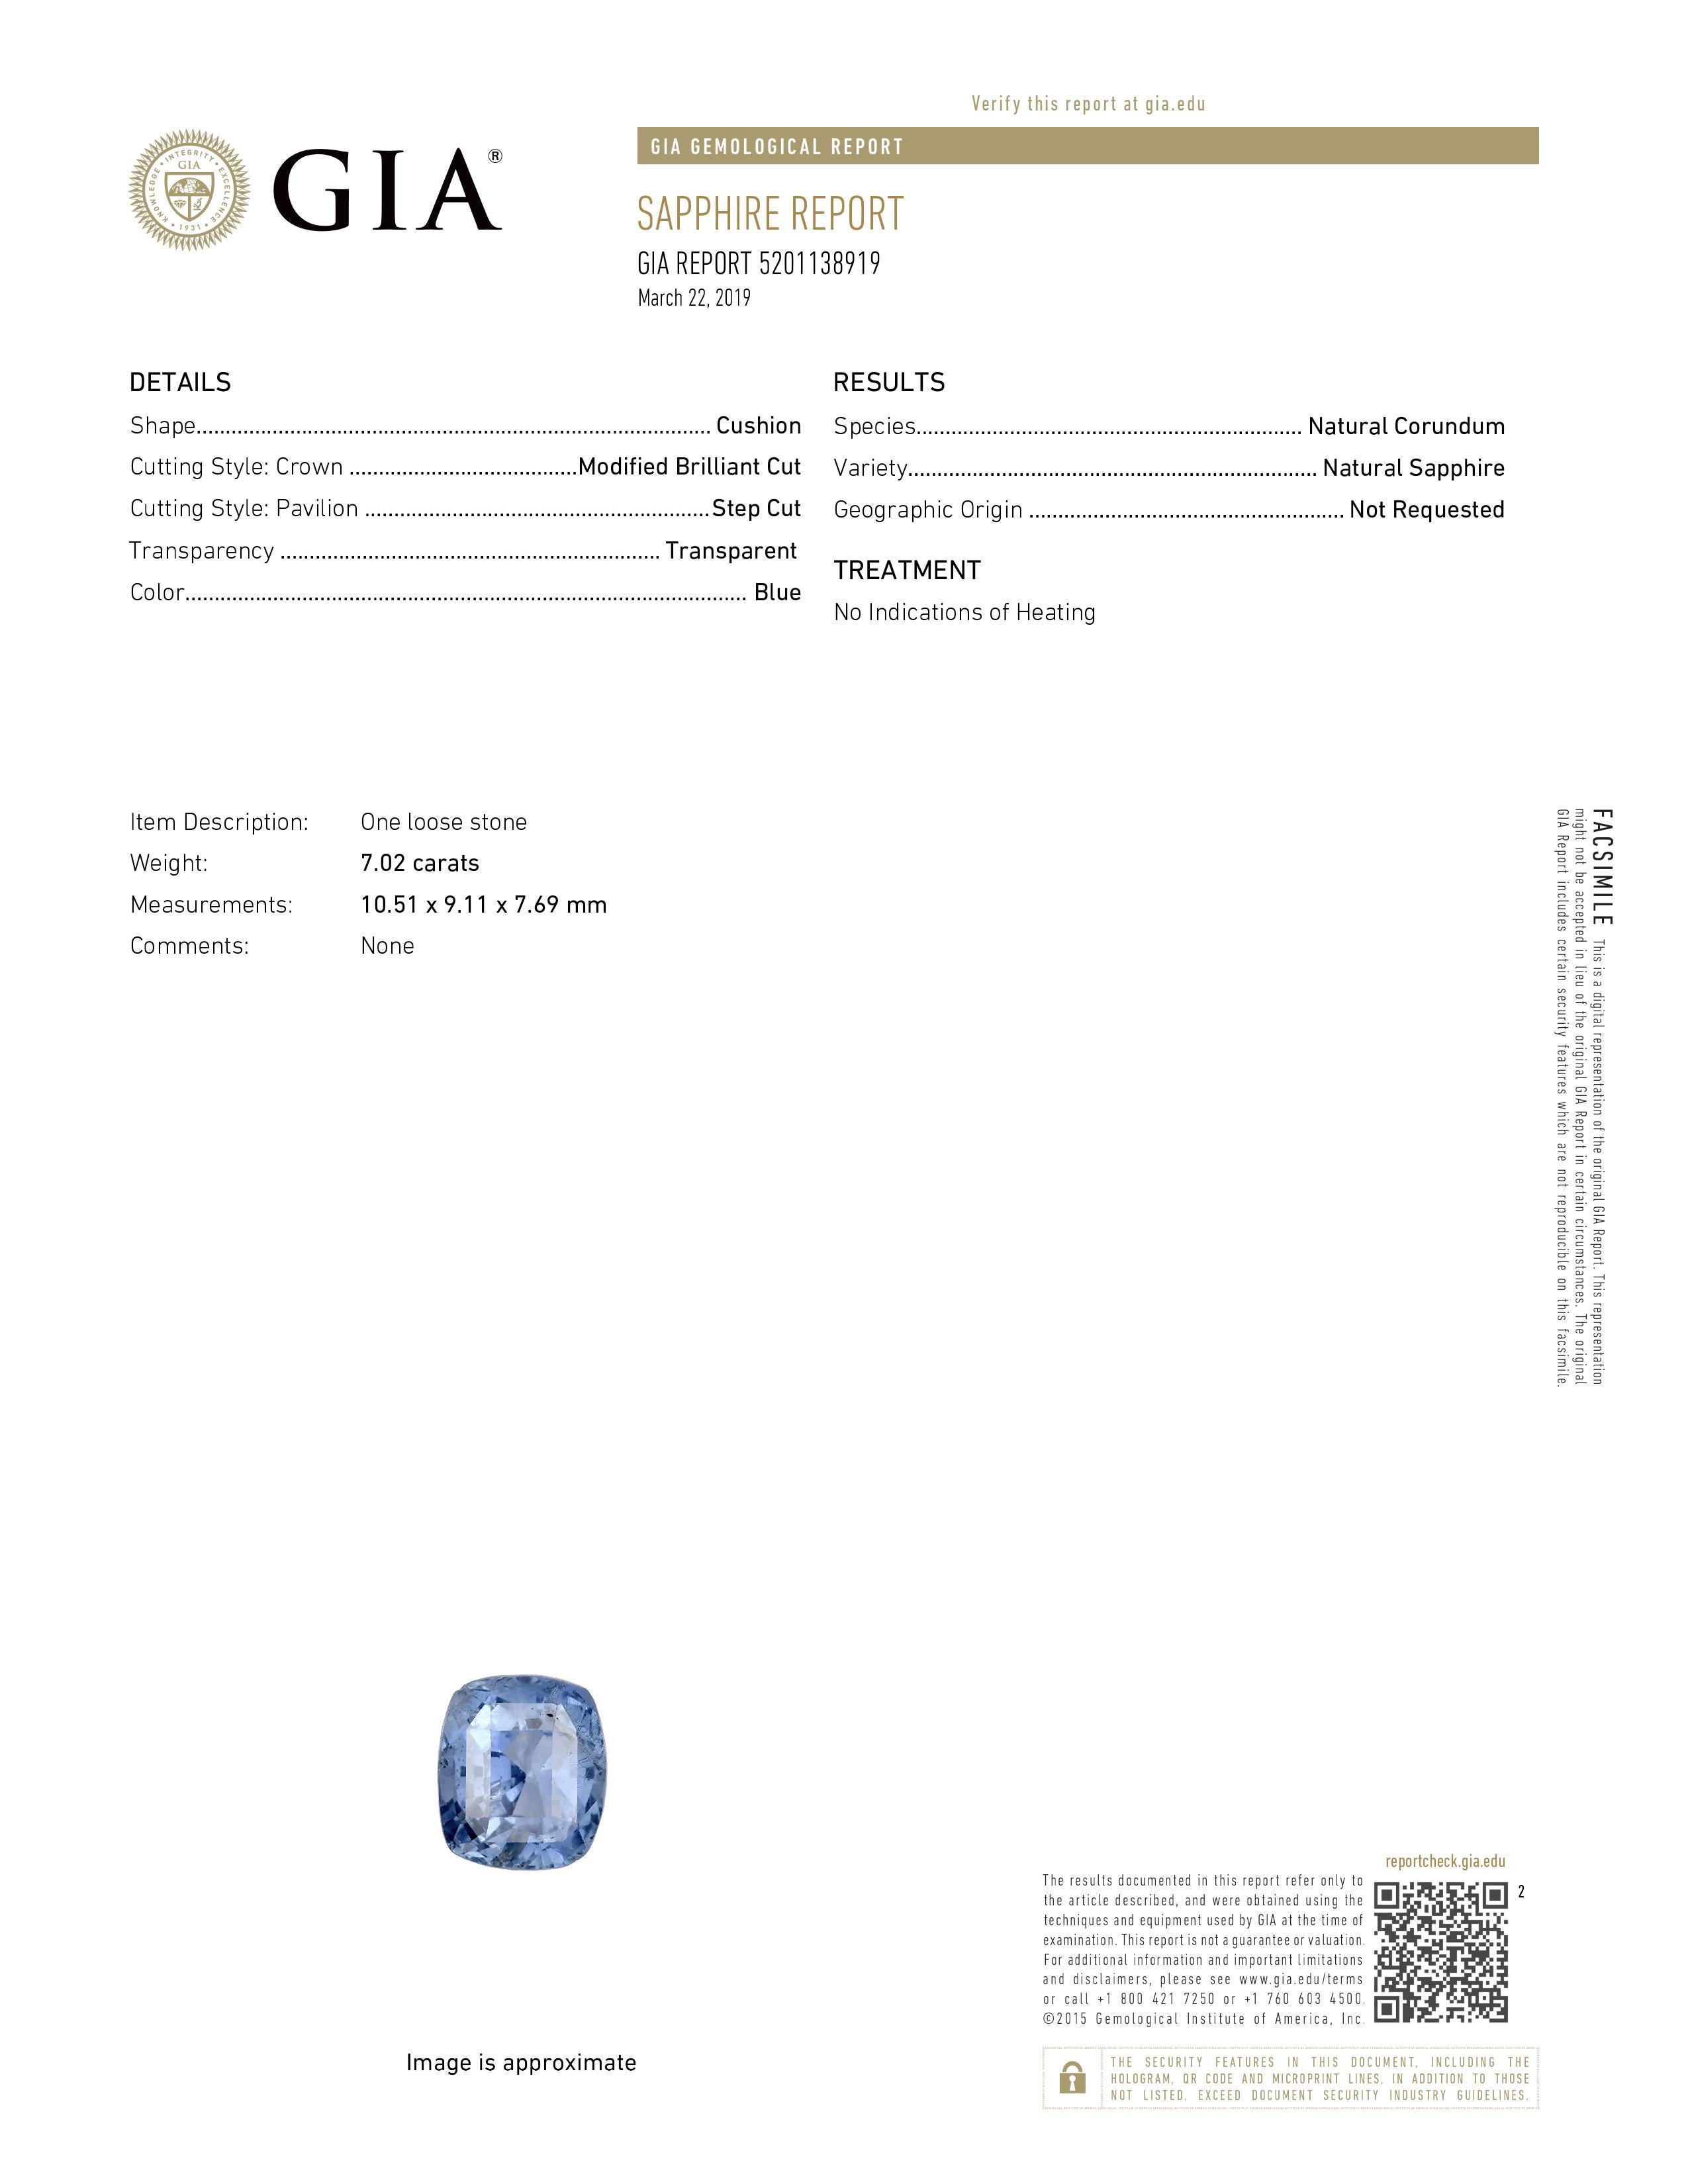 GIA Certified 7.02 Carat NO HEAT Blue Sapphire For Sale 1